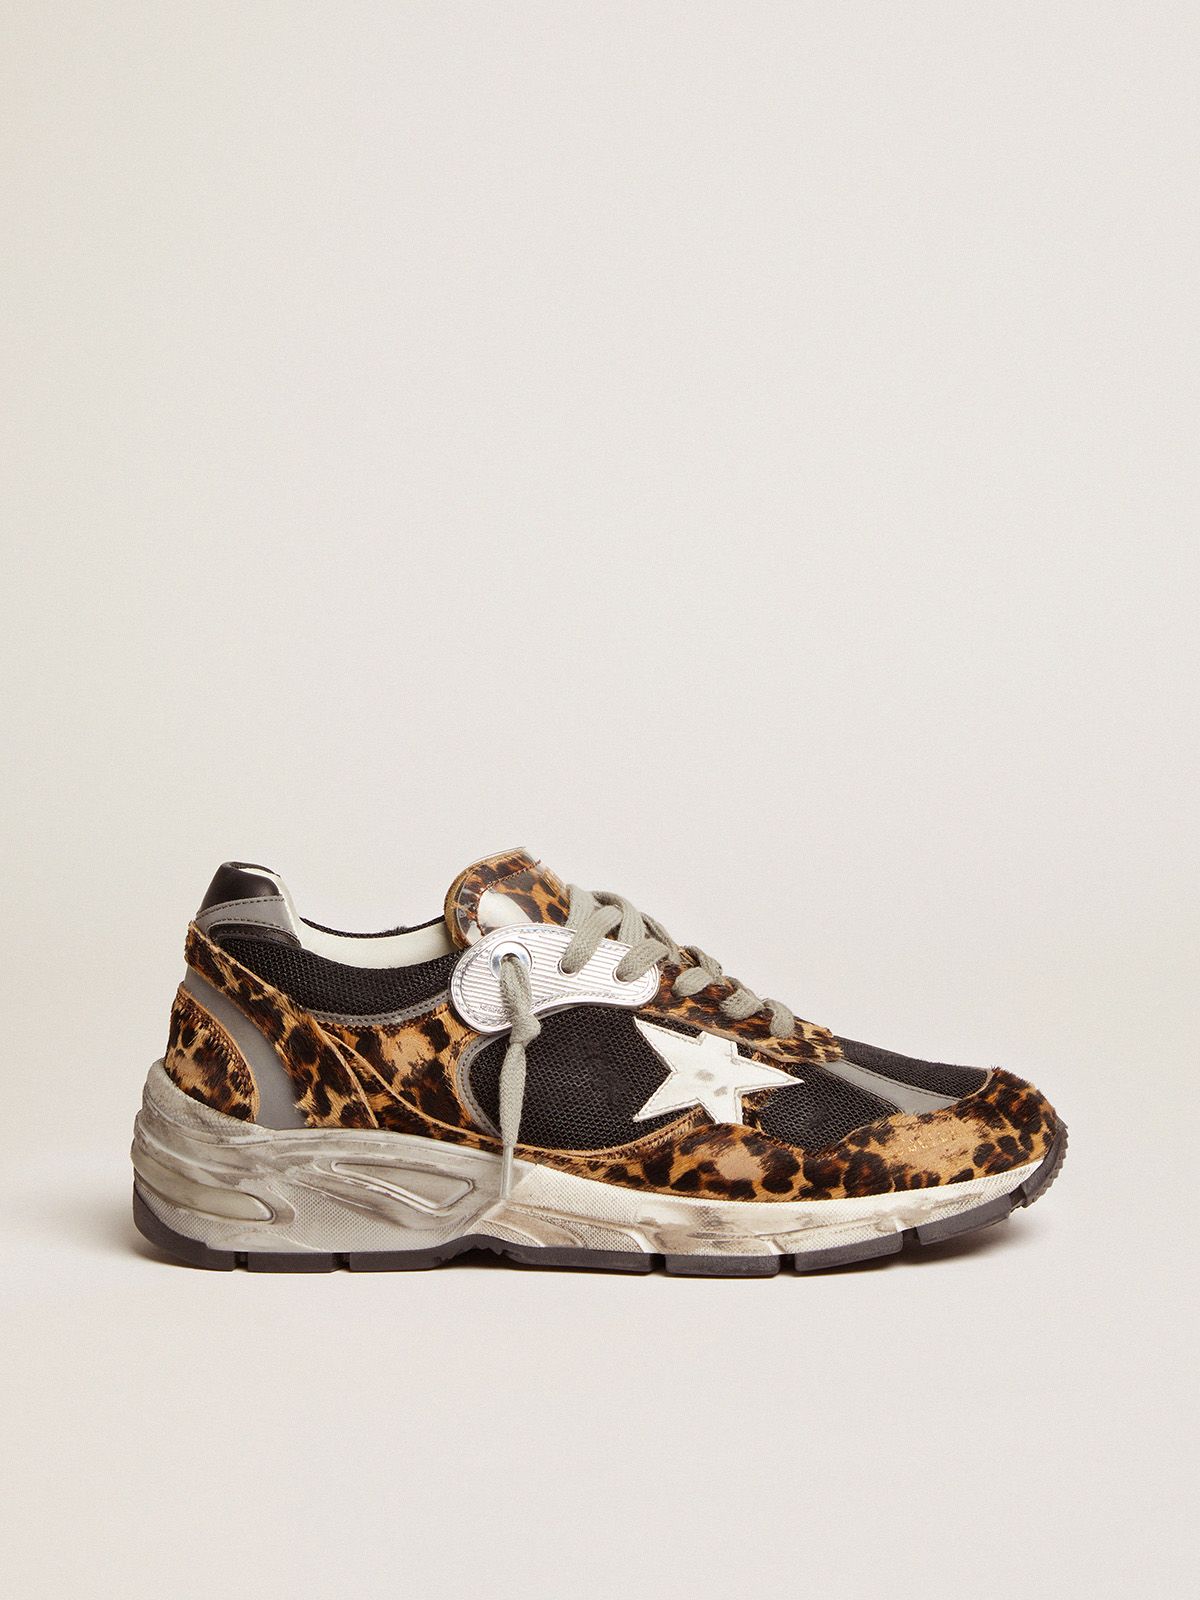 golden goose star sneakers in Dad-Star pony with skin leather white leopard-print